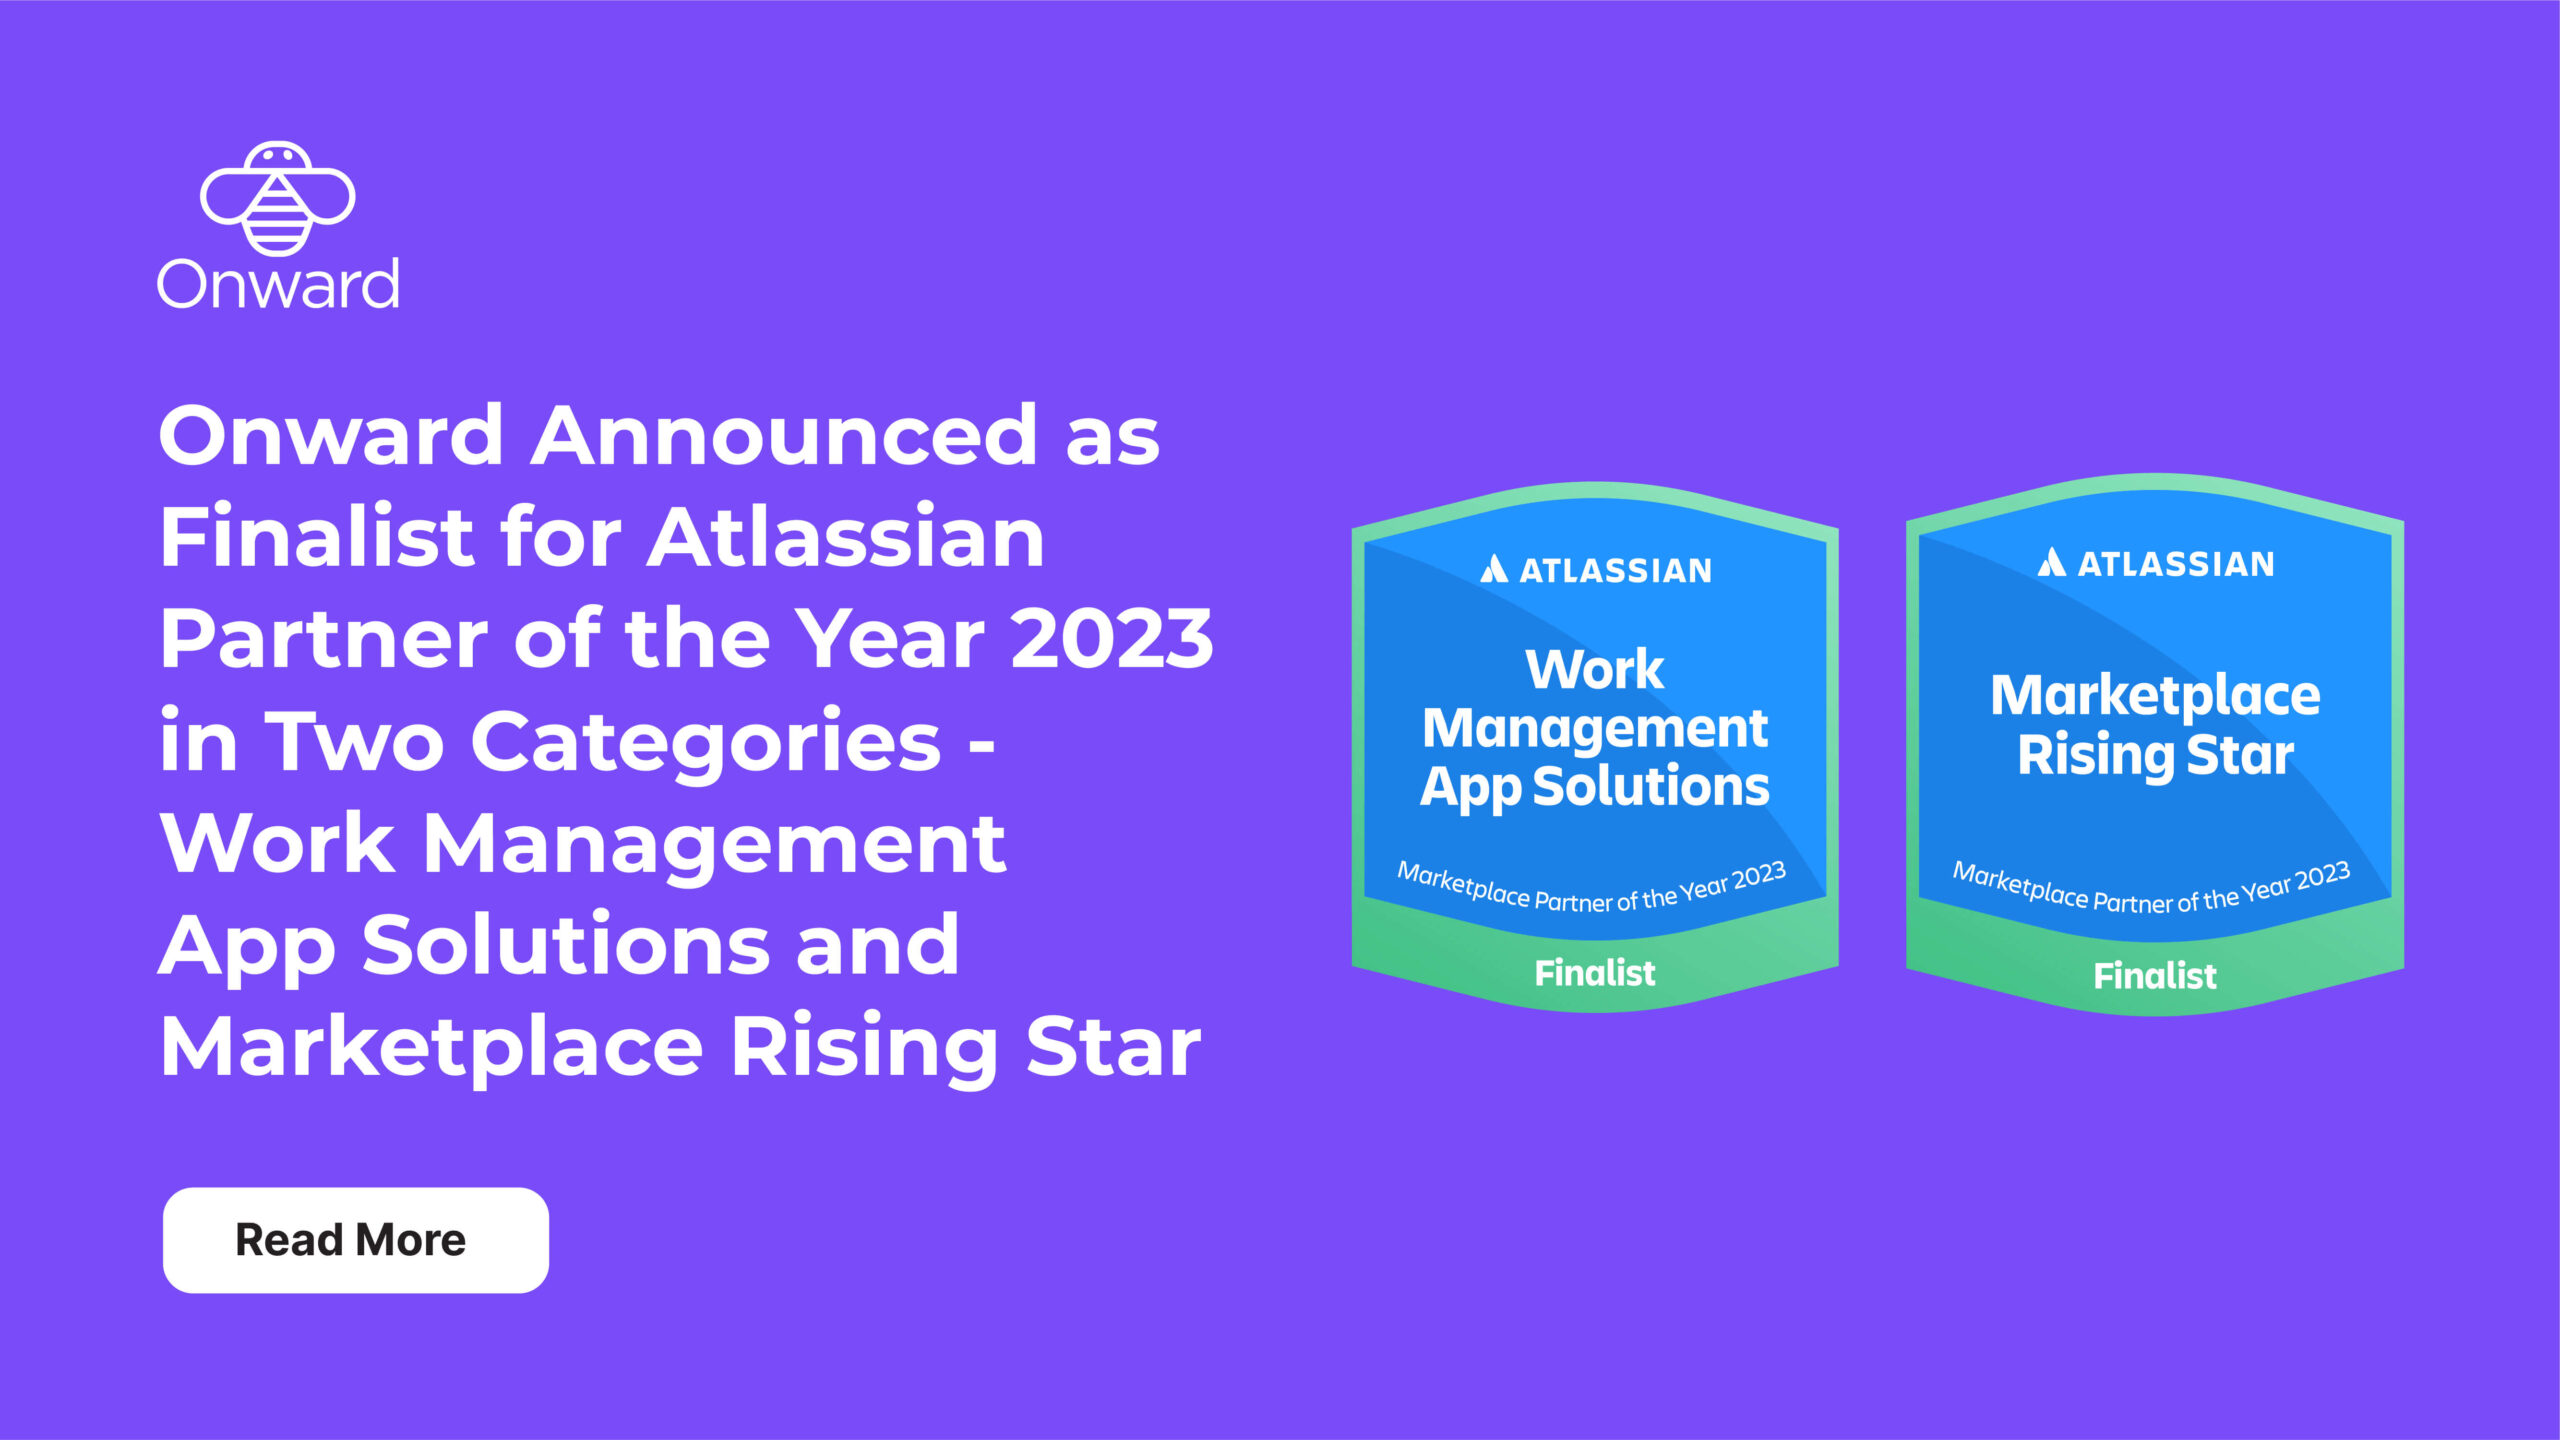 Onward Announced as Finalist for Atlassian Partner of the Year 2023